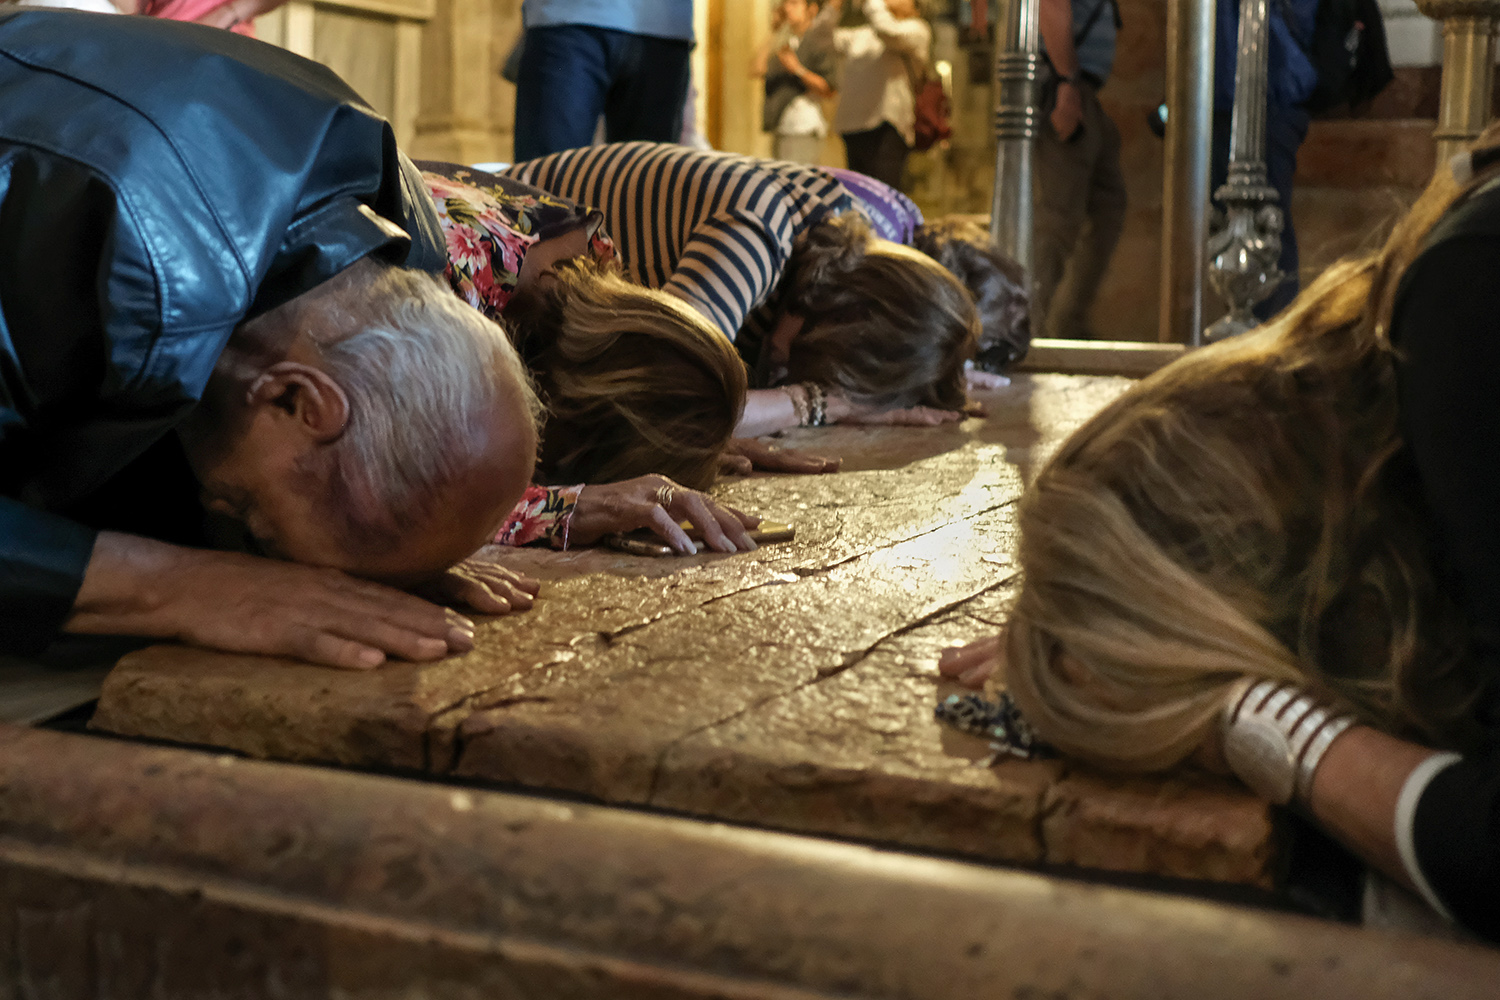  Christian pilgrims at the Stone of Anointing, Jerusalem, where Jesus’ body is said to have been prepared for burial.  